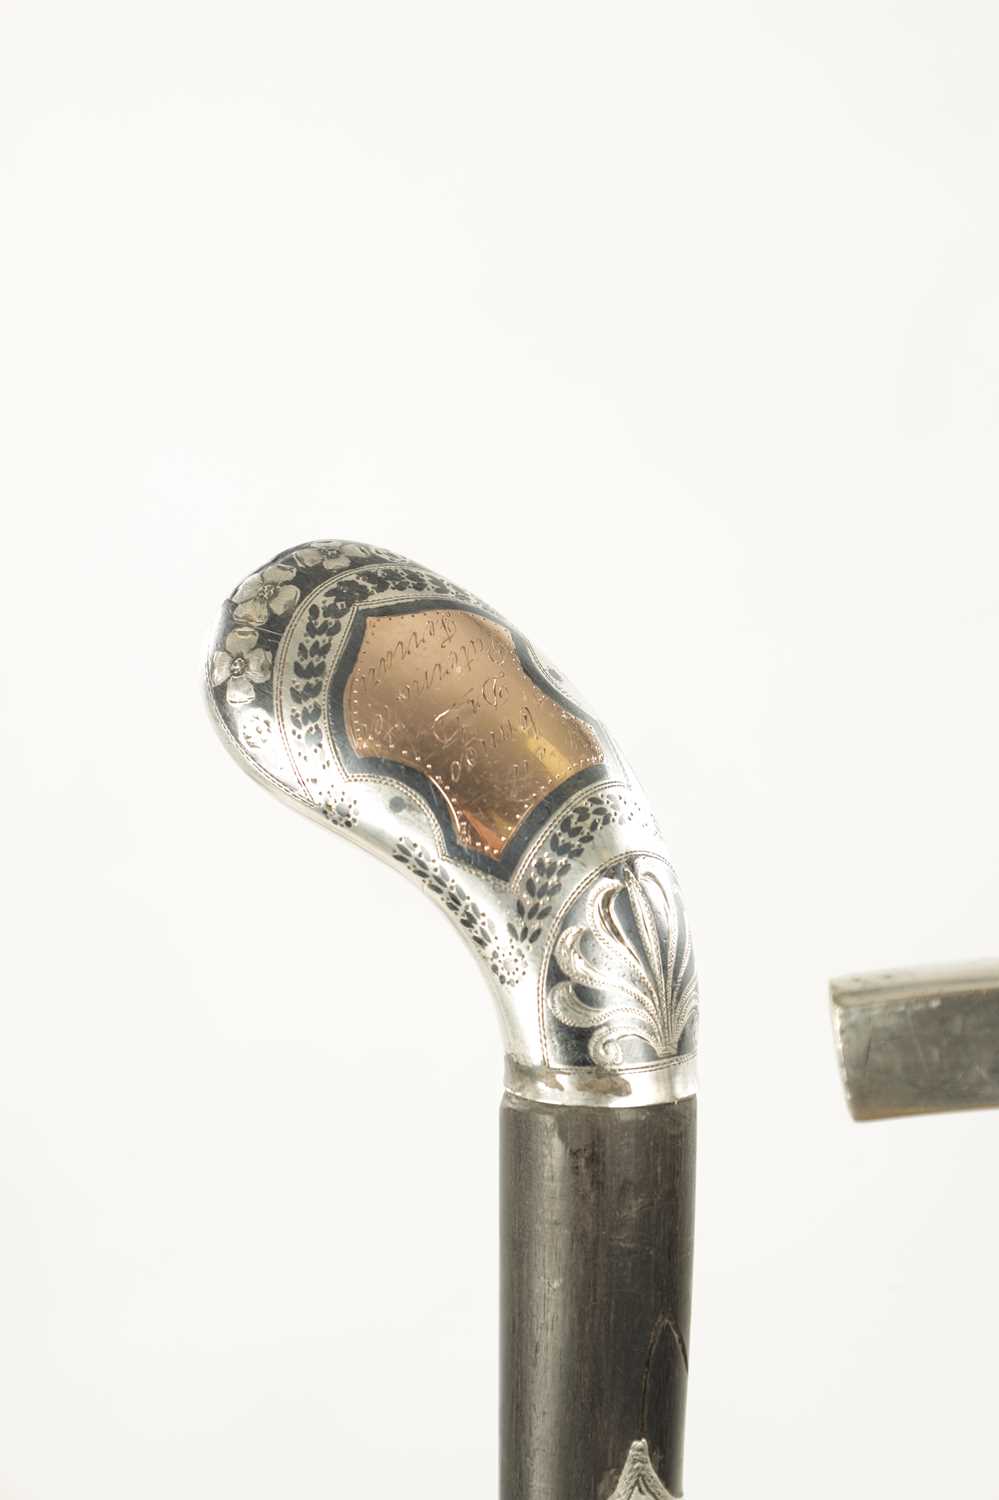 OF GOLFING INTEREST, A COLLECTION OF THREE 19TH CENTURY SILVER TOPPED WALKING STICKS - Image 6 of 9